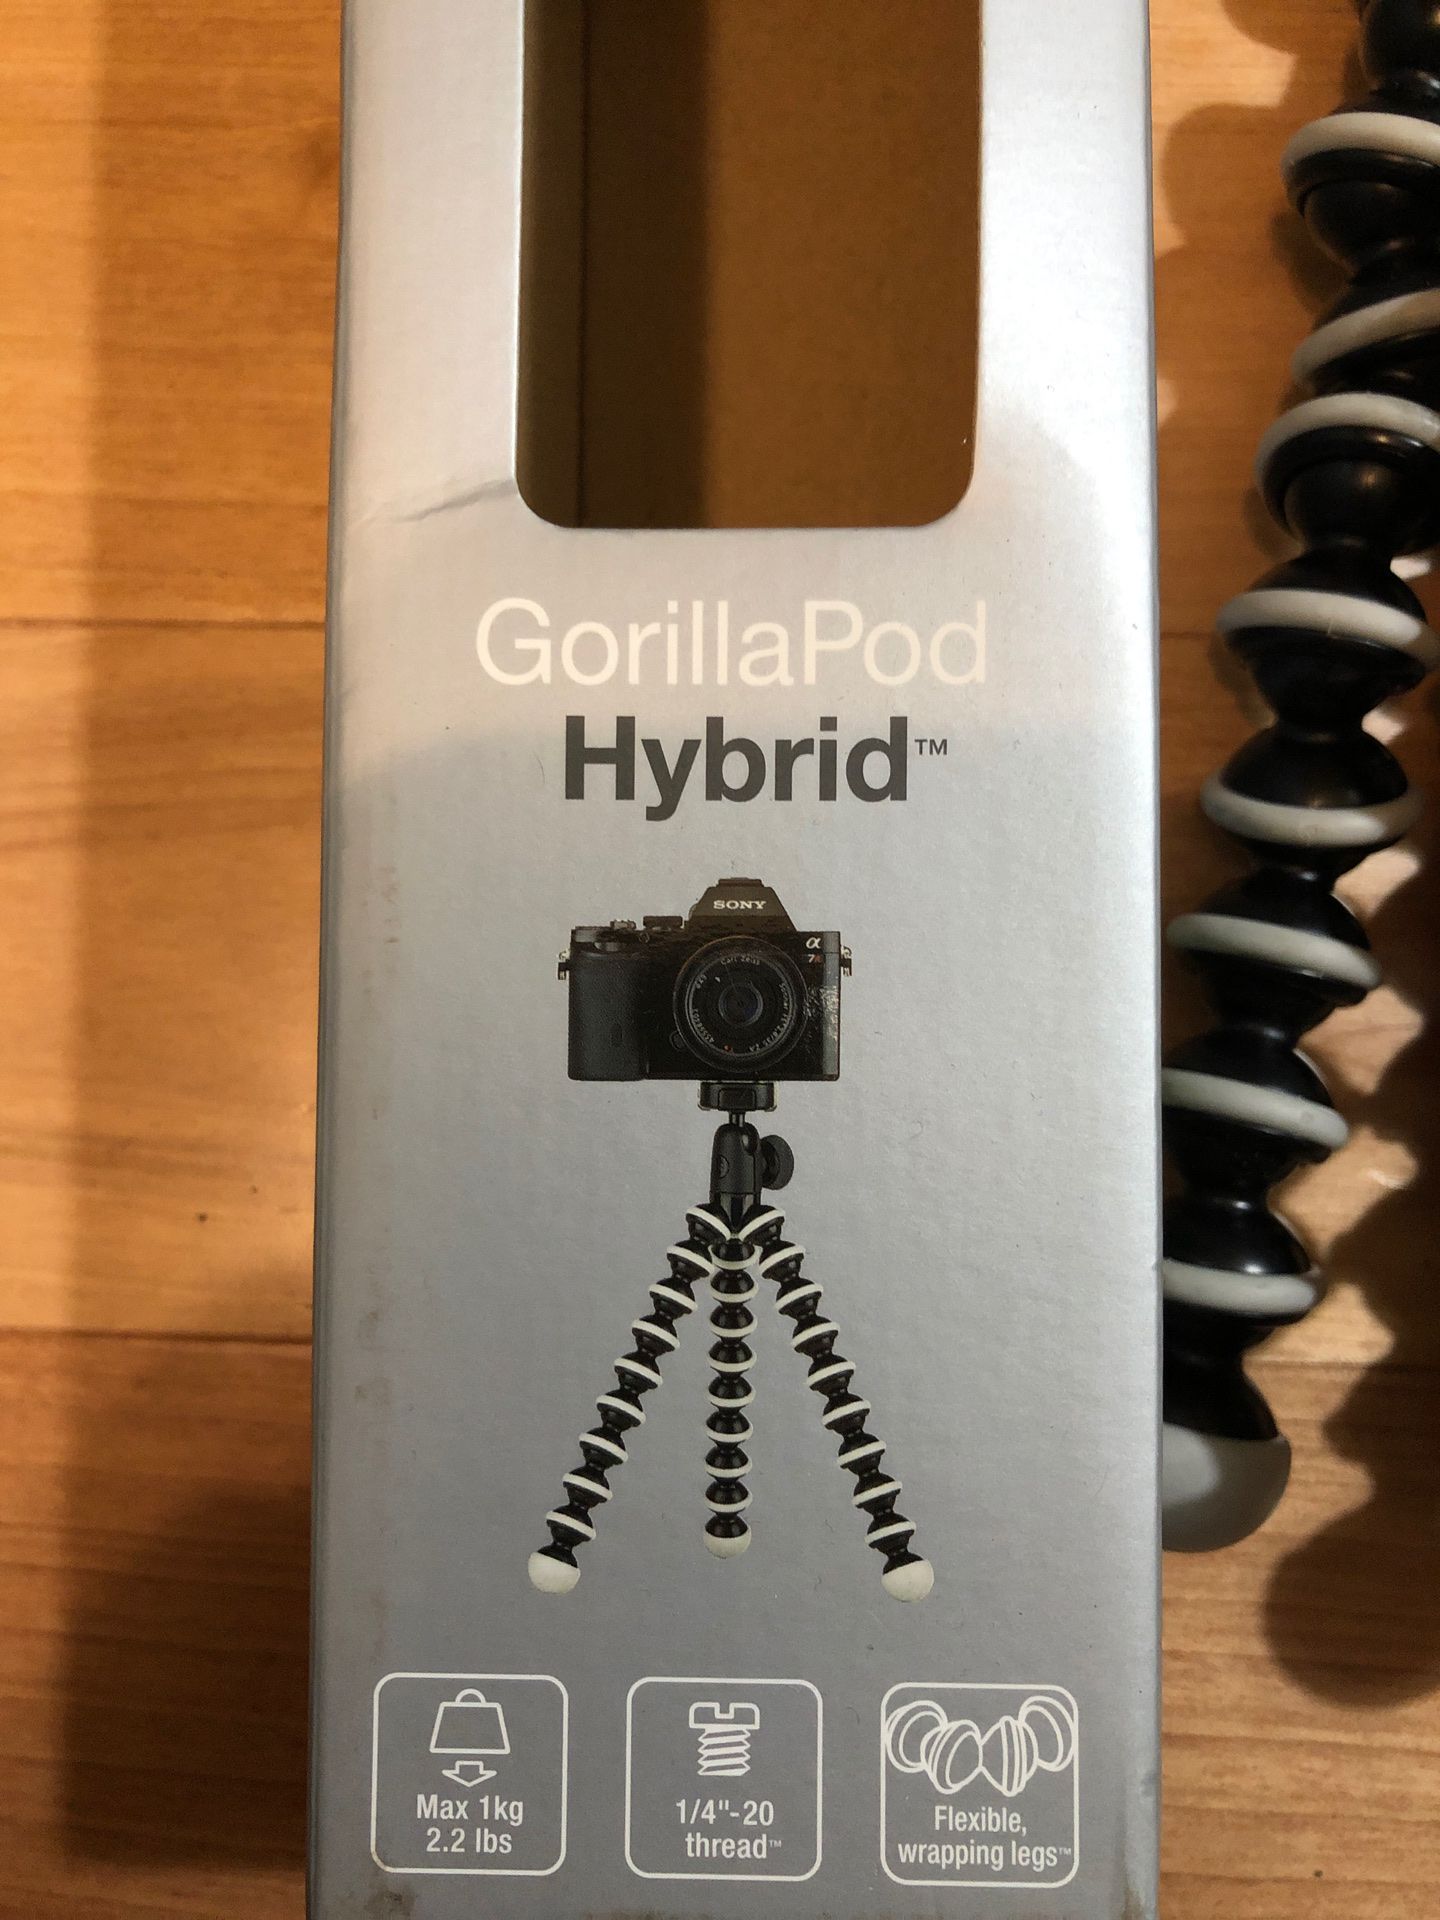 JOBY GorillaPod Hybrid Tripod for Mirrorless and 360 Cameras - A Flexible, Portable and Lightweight Tripod With a Ball Head and Bubble Level with a G